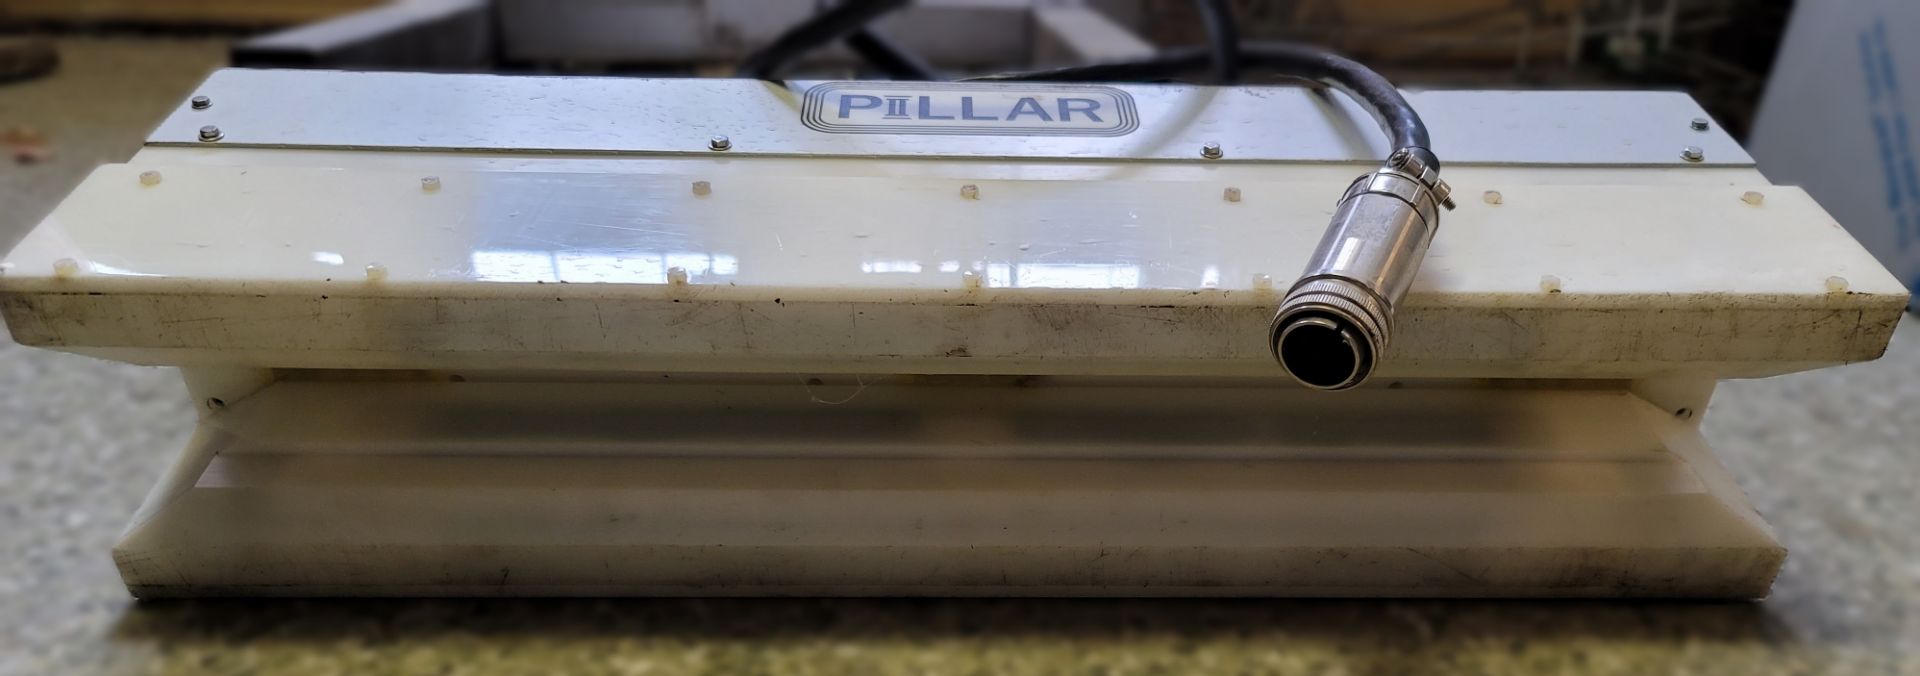 (Located in Belle Glade, FL) PILLAR INDUCTION SEALER HEAD, MODEL: COIL C2CW9A00, SERIAL: 62400-1 - Image 2 of 3